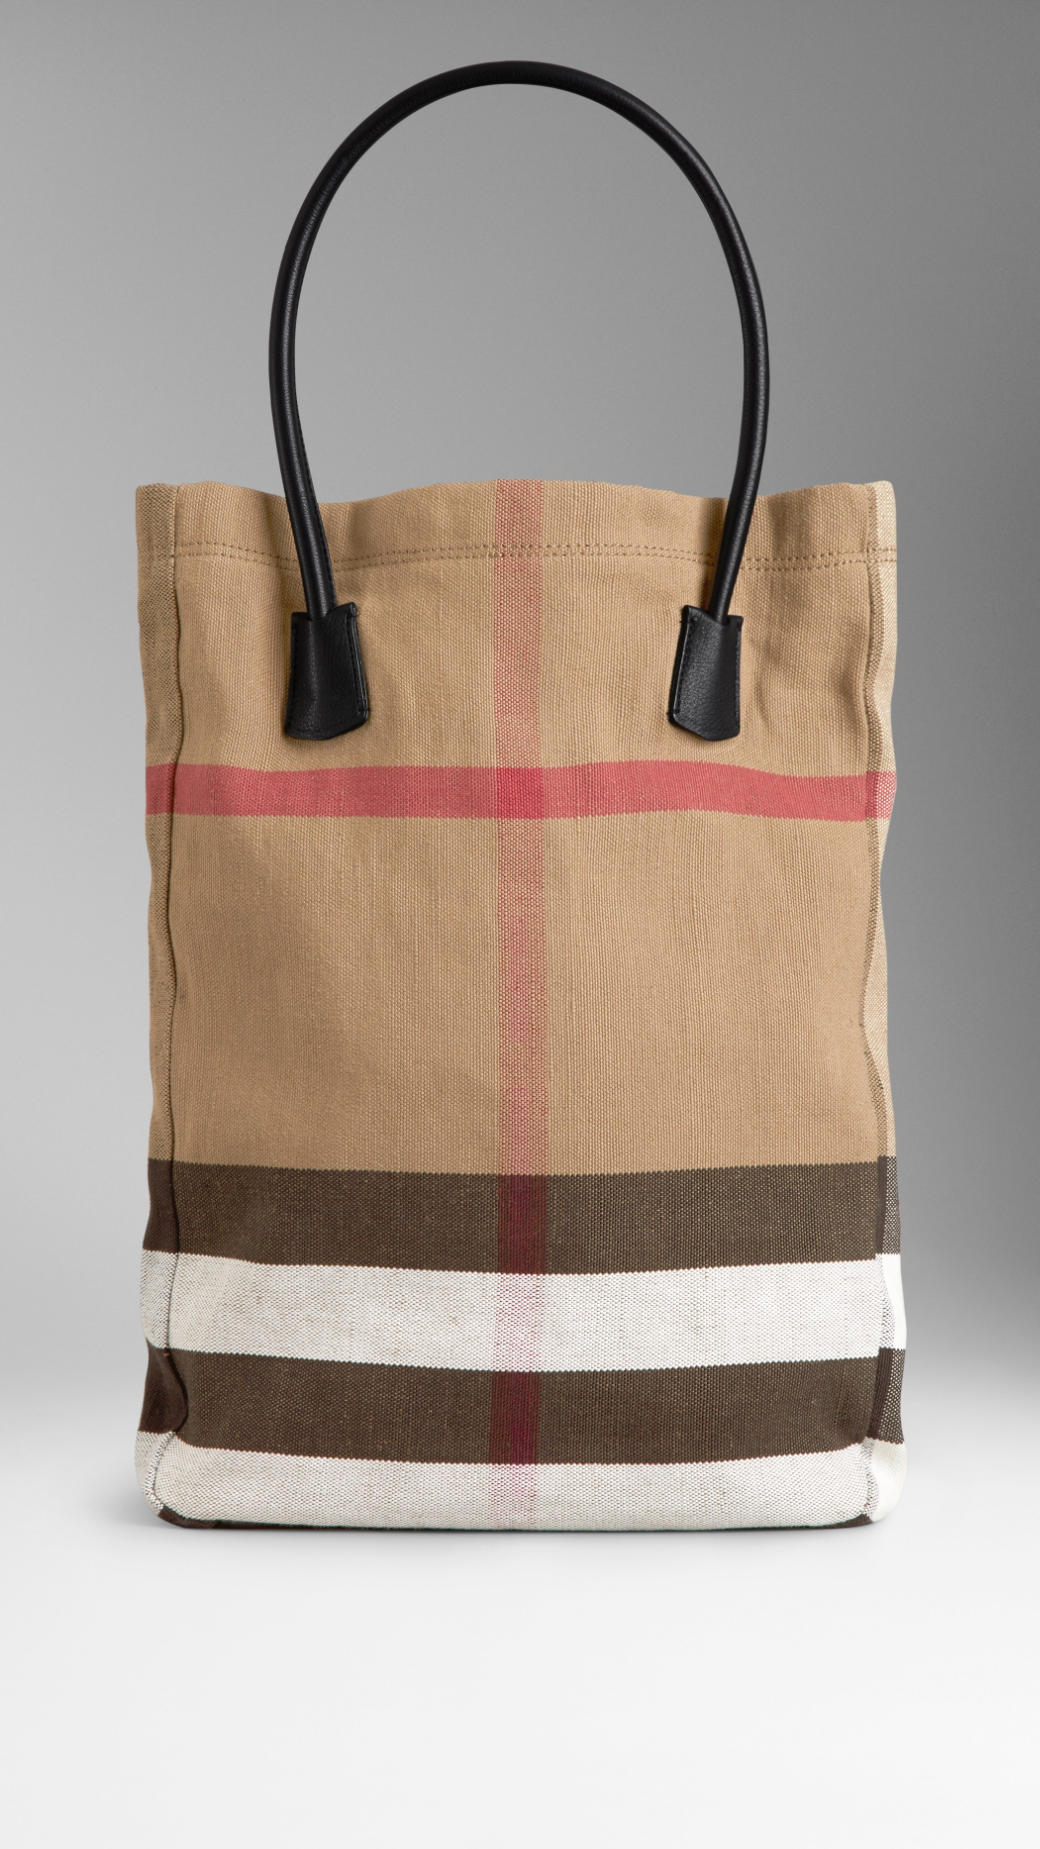 Burberry Canvas Check Tote Bag in Black (Natural) for Men - Lyst